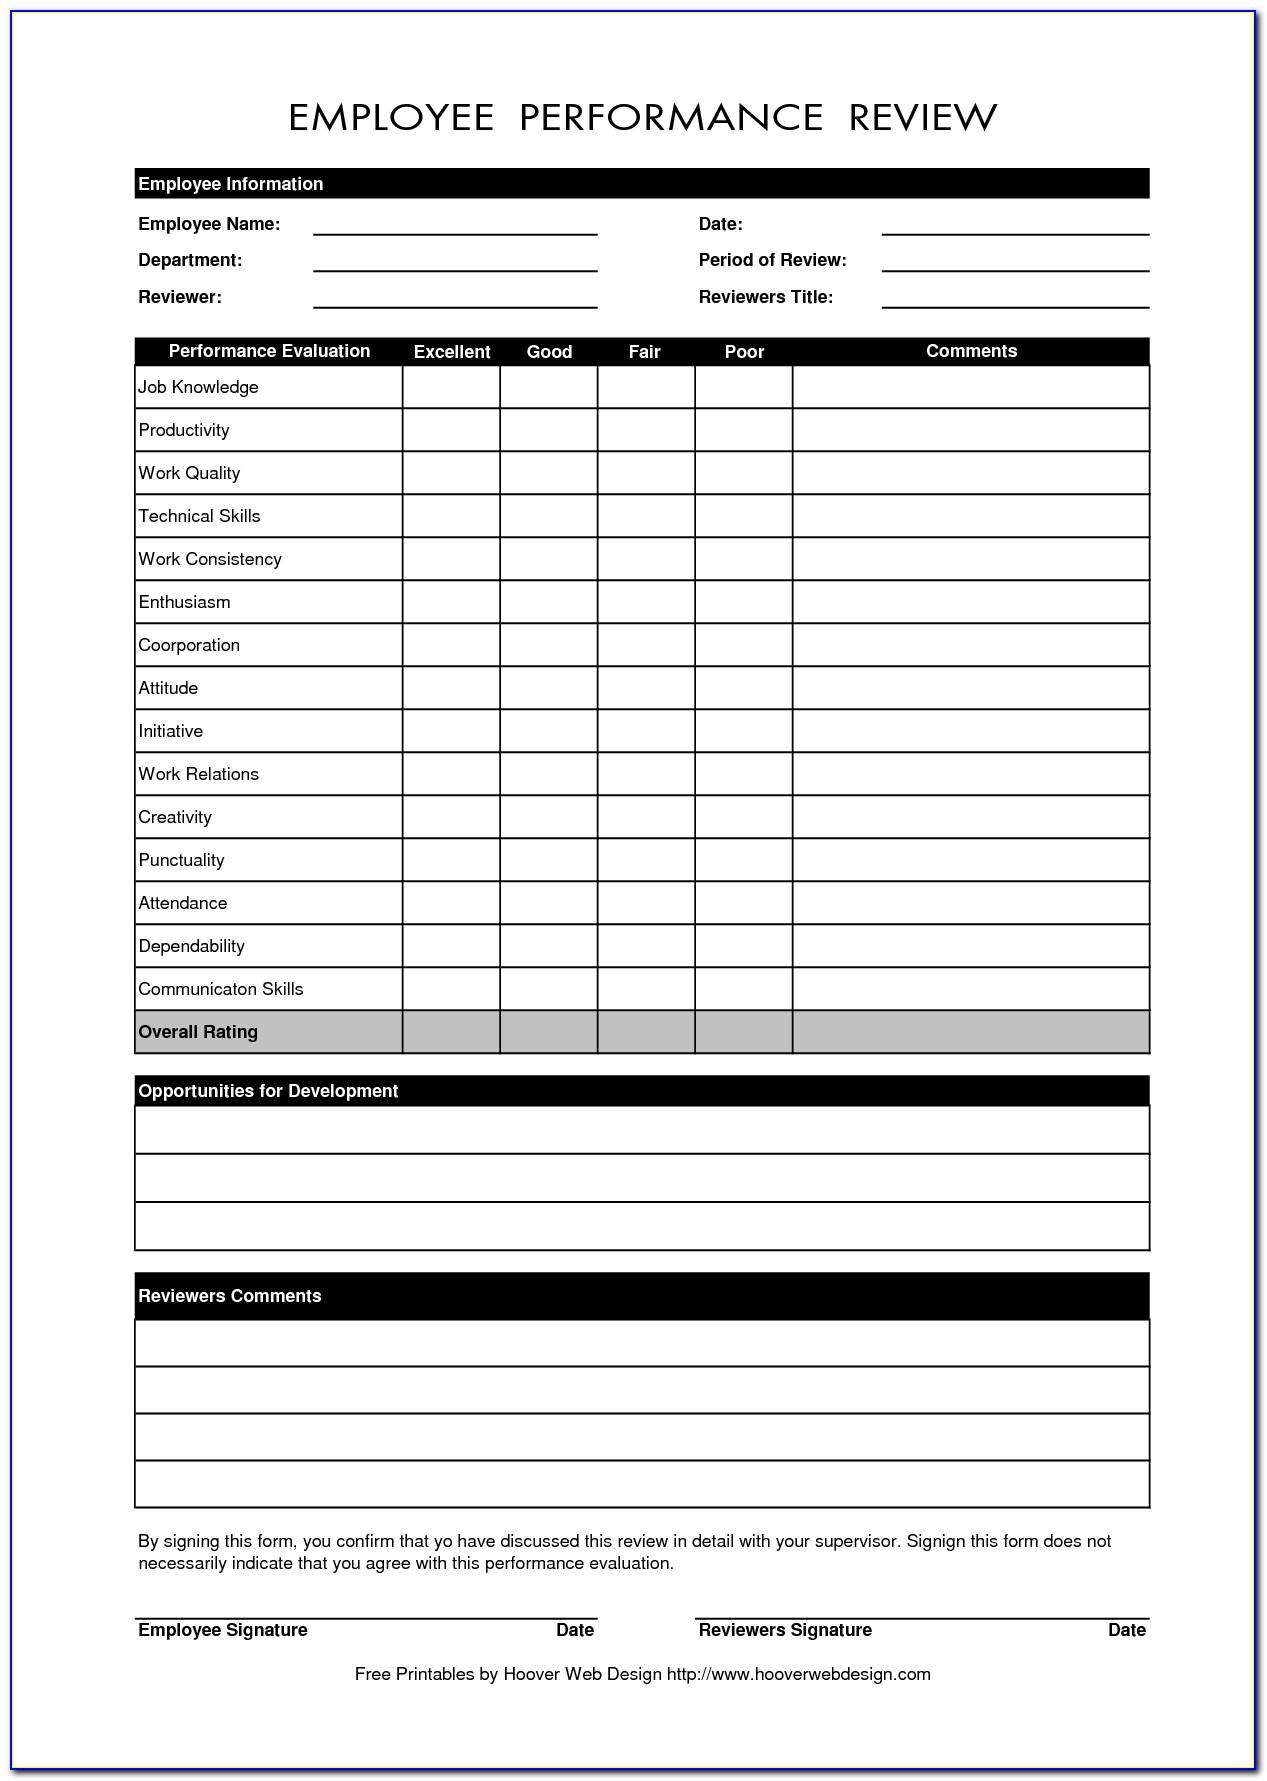  Free Blank Employee Evaluation Forms Form Resume Examples J3DW7AxDLp